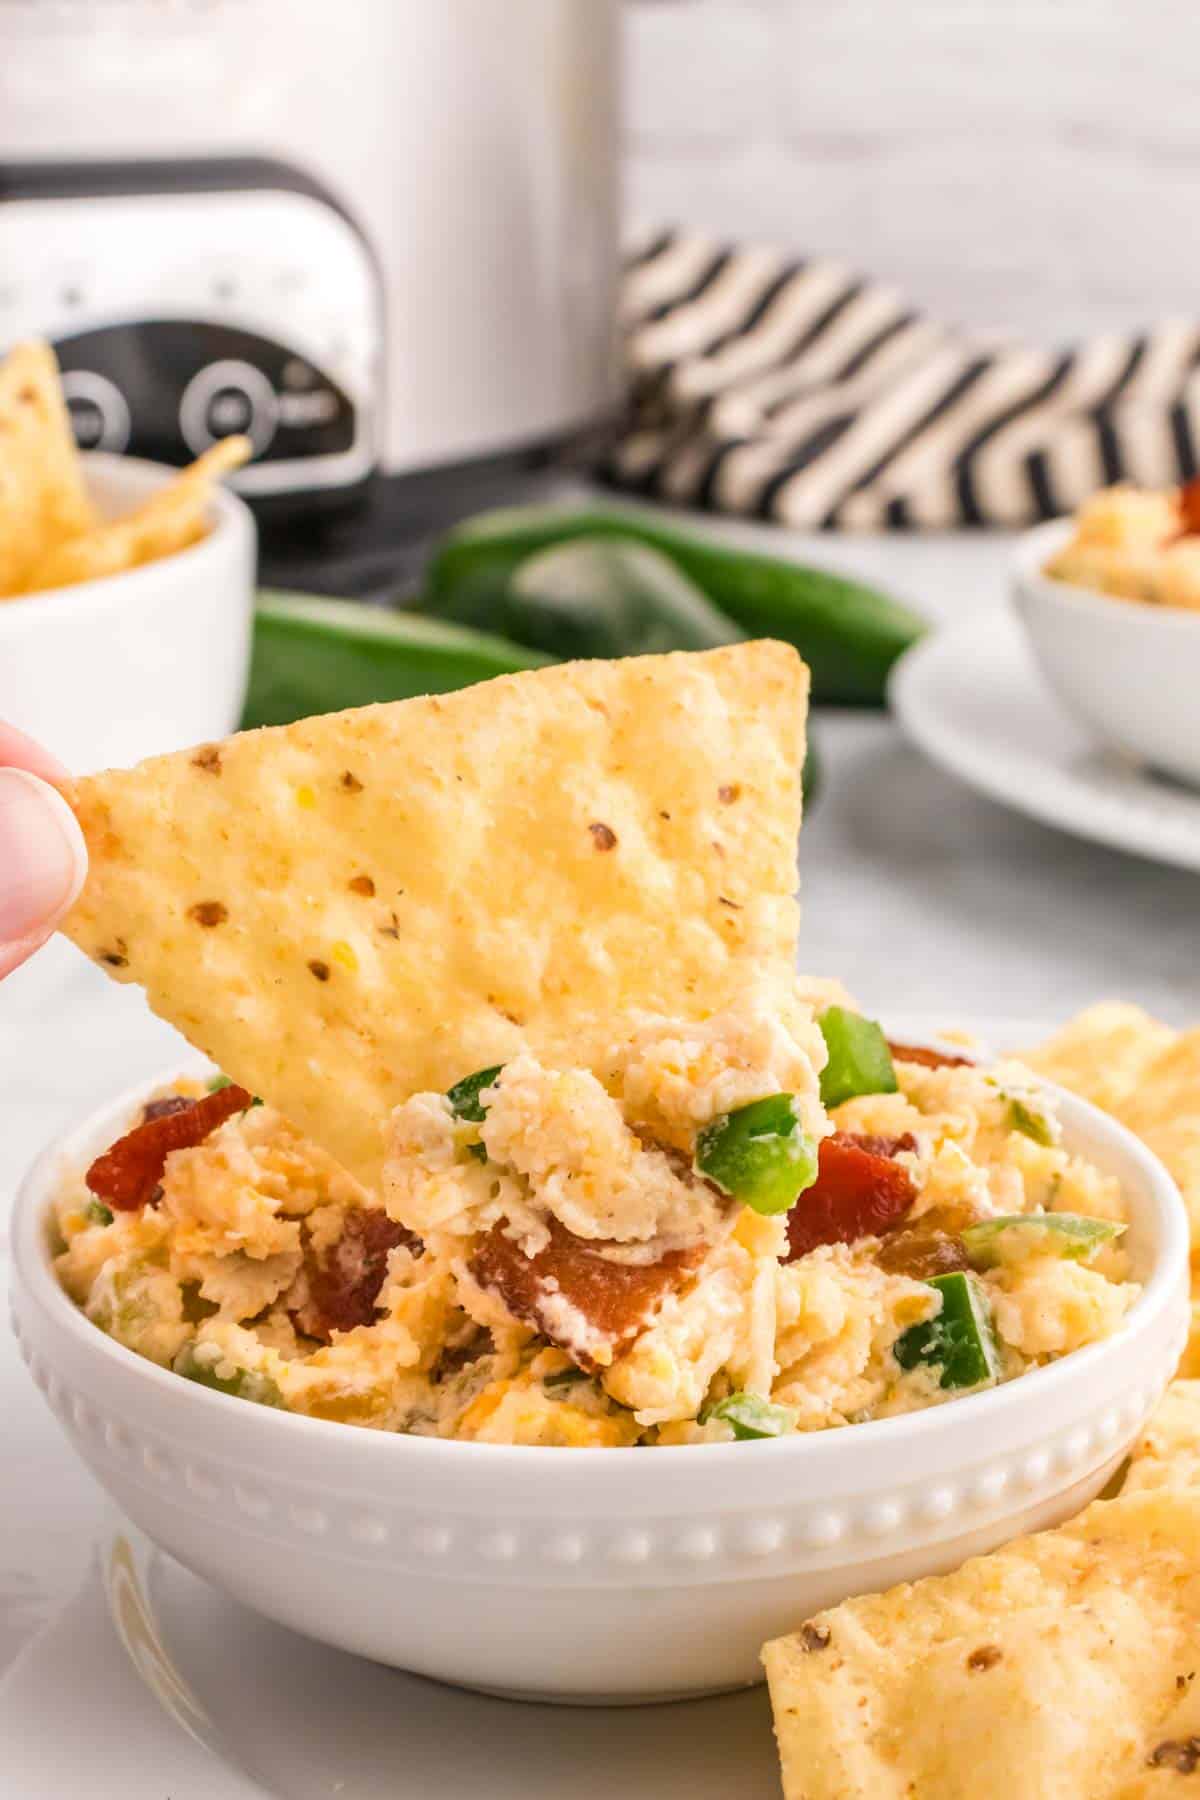 Crock Pot Jalapeno Popper Dip is a delicious hot dip recipe loaded with cream cheese, cheddar, Monterey Jack, mayo, sour cream, jalapenos, green chilies, parmesan, panko bread crumbs and bacon.